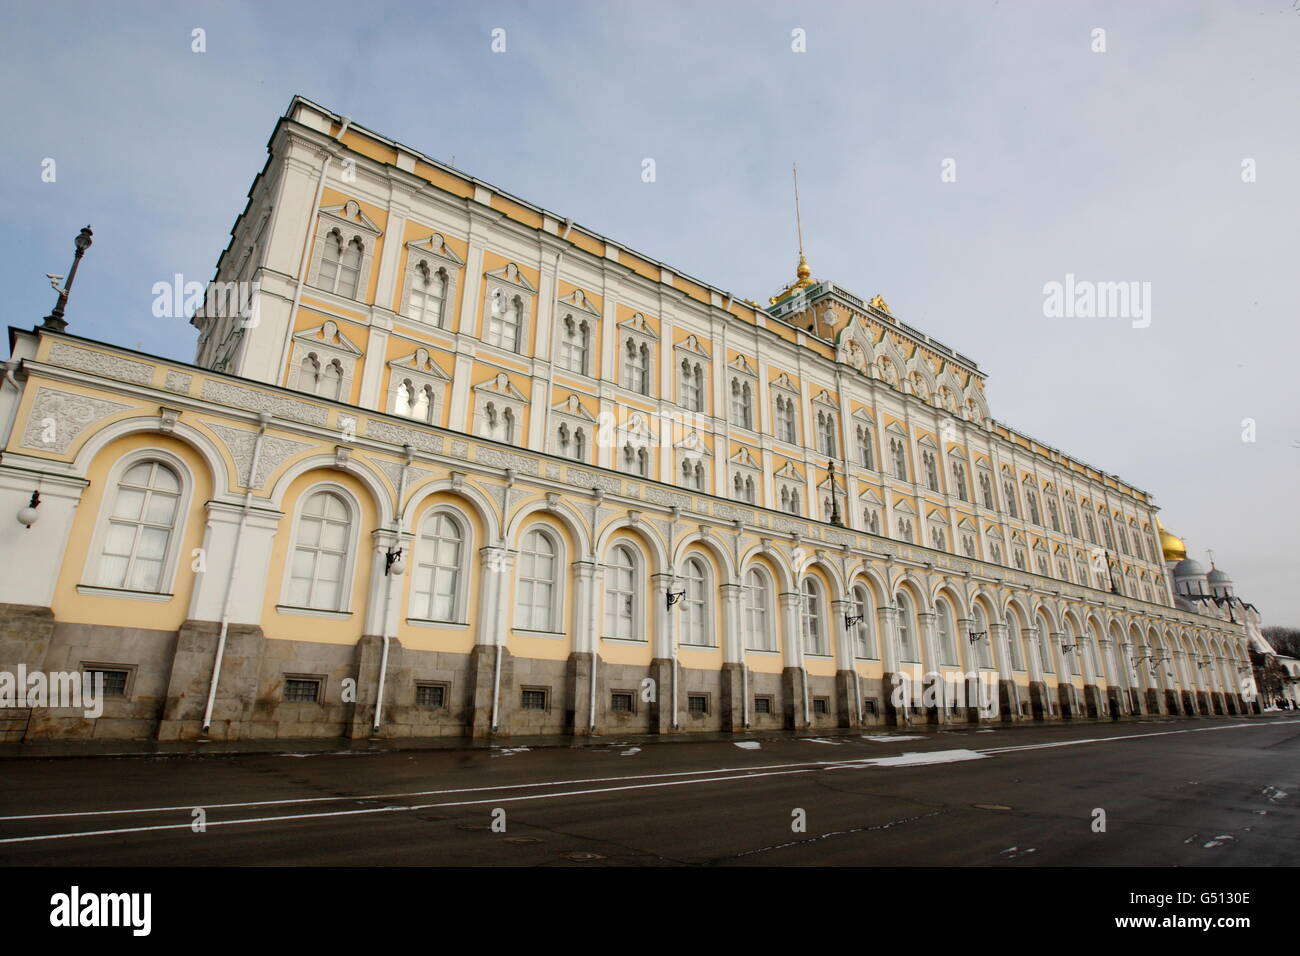 A General picture of the The Great Kremlin Palace in Moscow, Russia Stock Photo